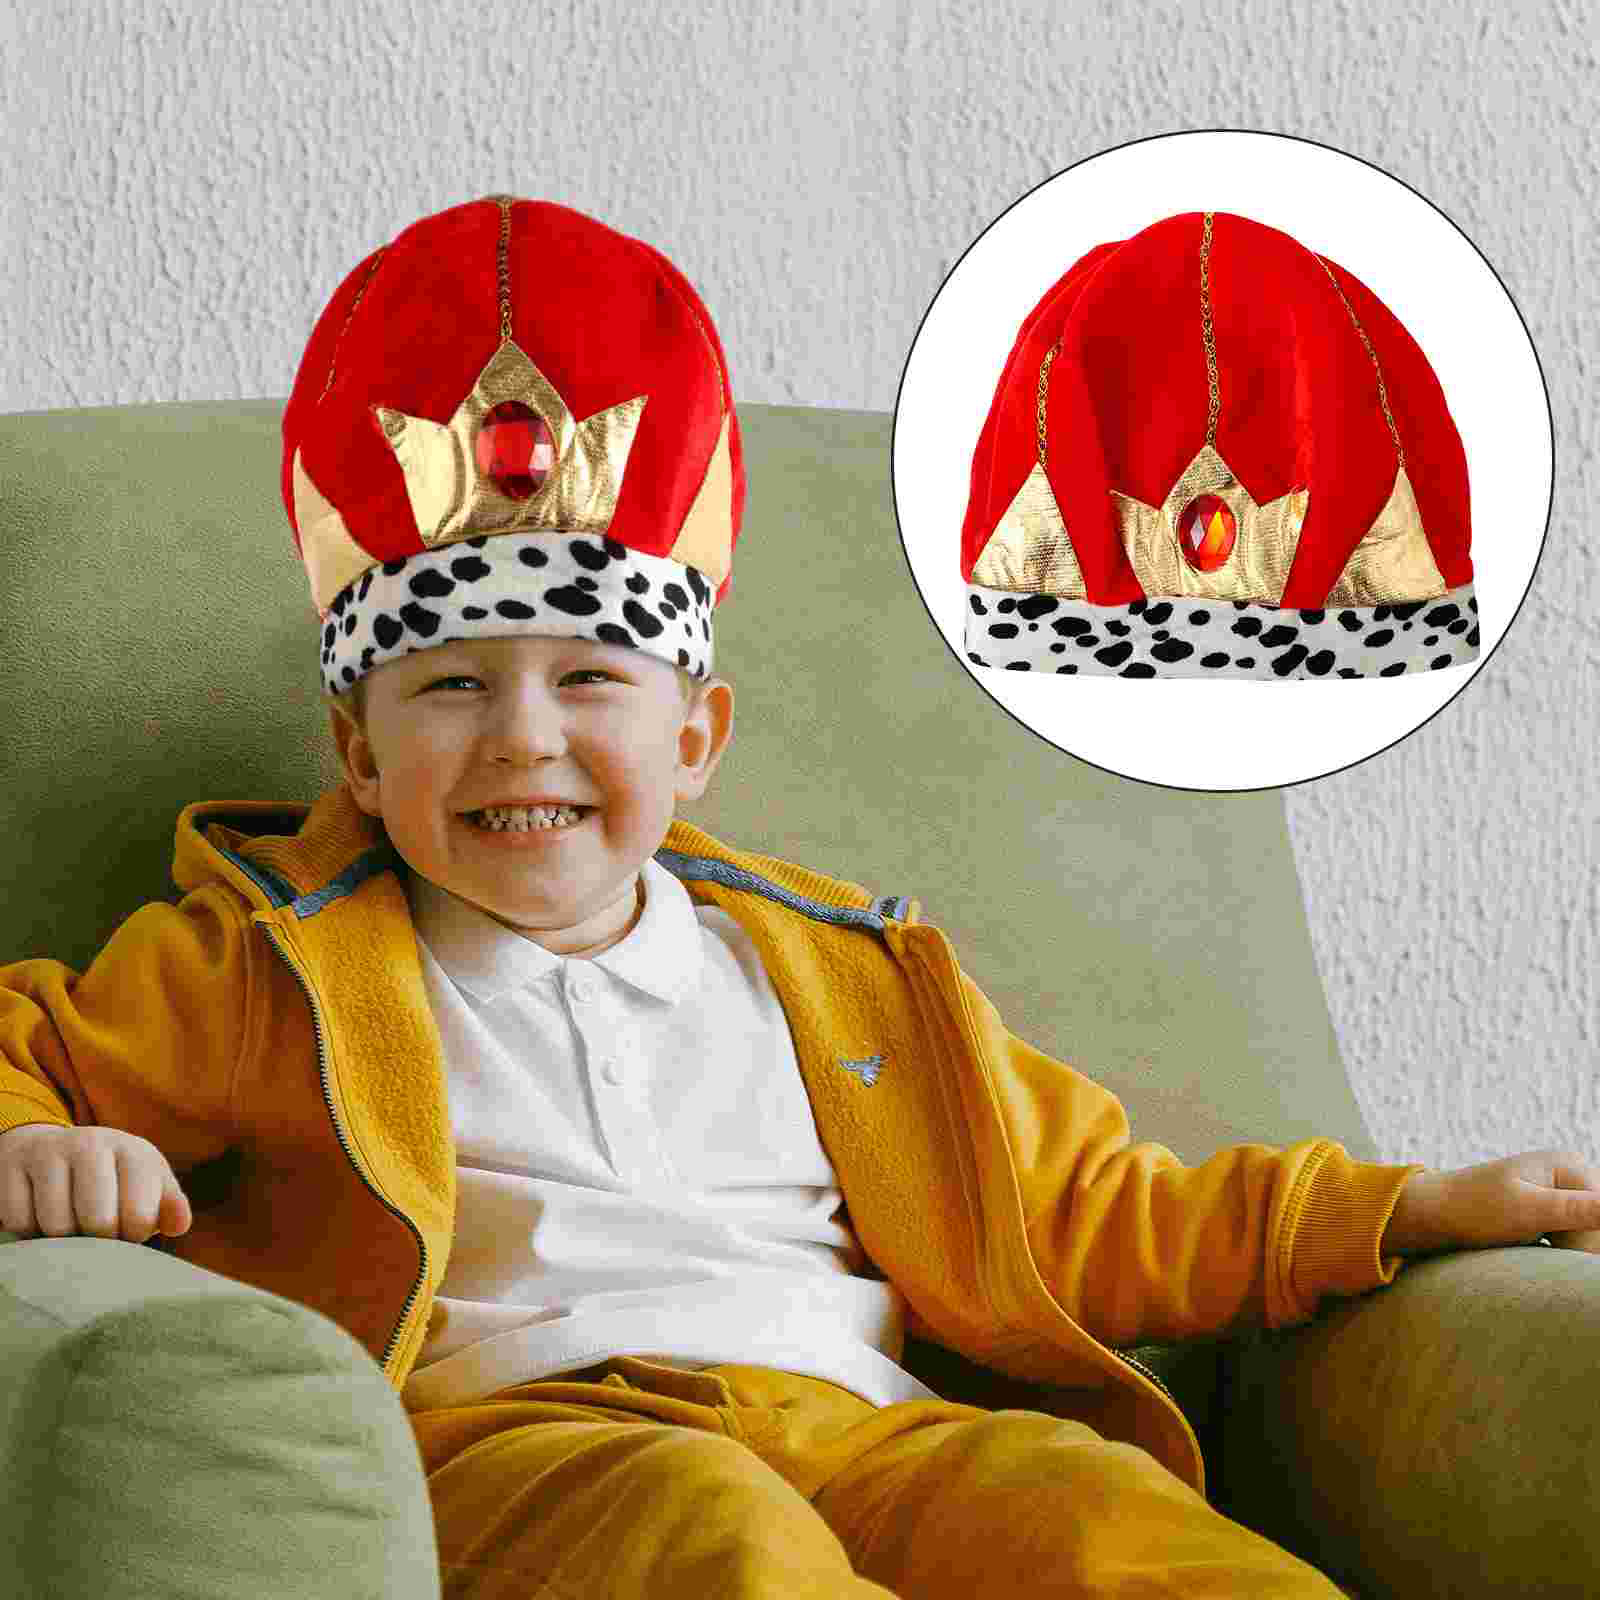 King Crown Headdress Party Supplies Crown Headwear Party Costume King Hat